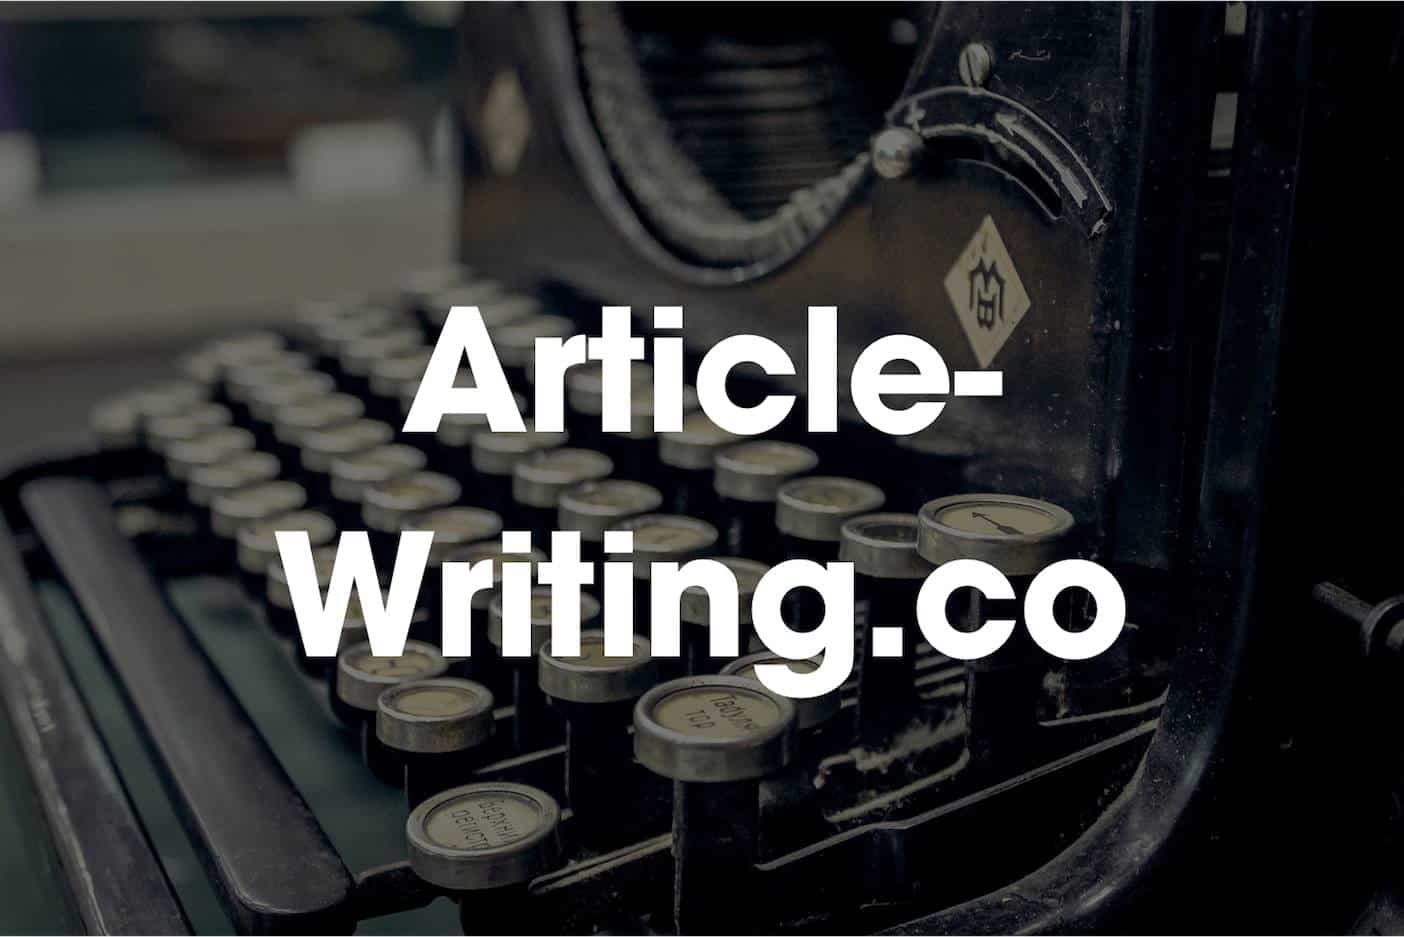 Article Writing Blog - Content Writing Tips & Blogging Strategy